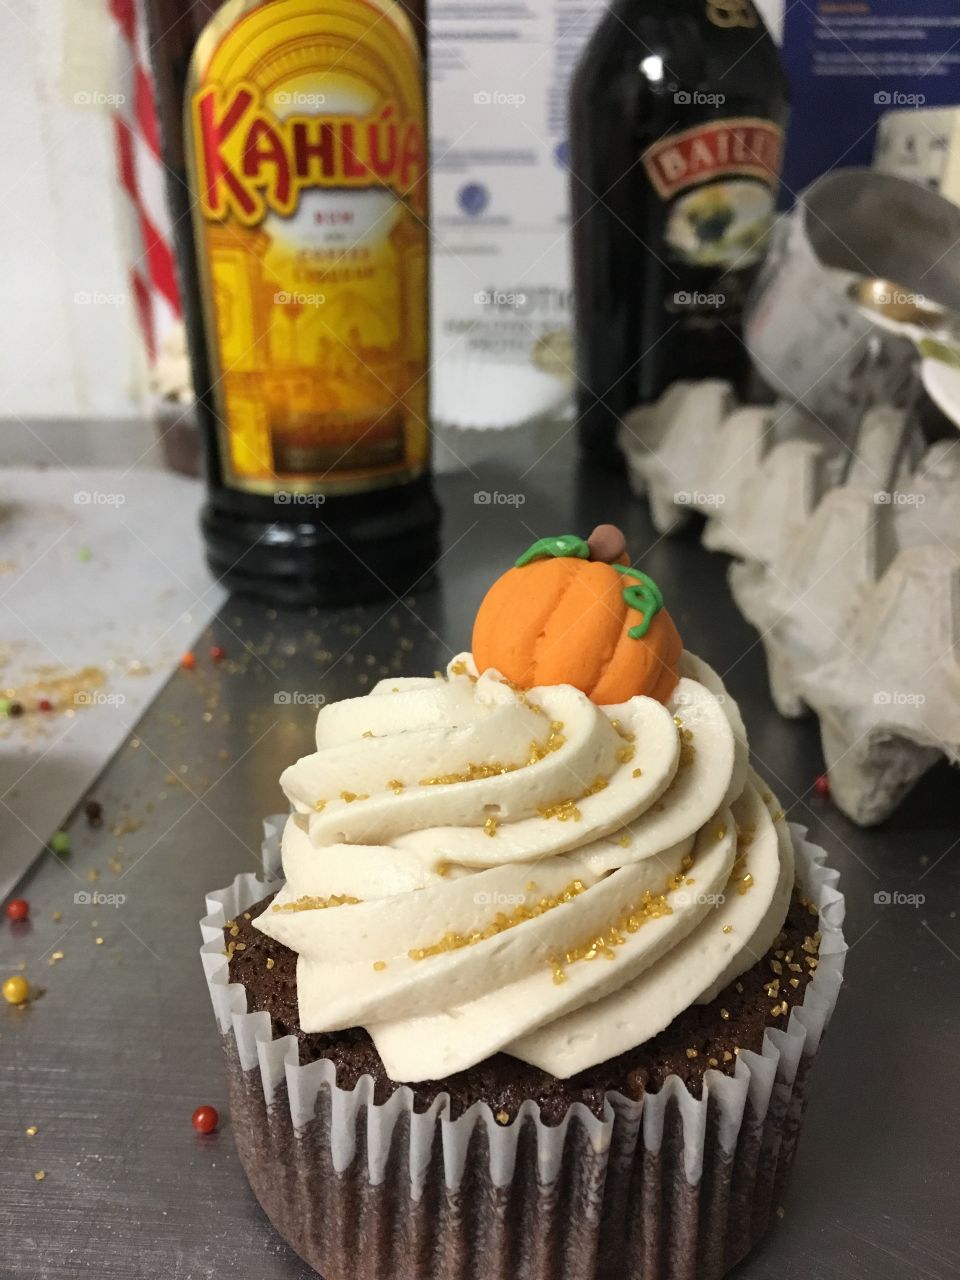 Chocolate cupcake with Kahlua frosting